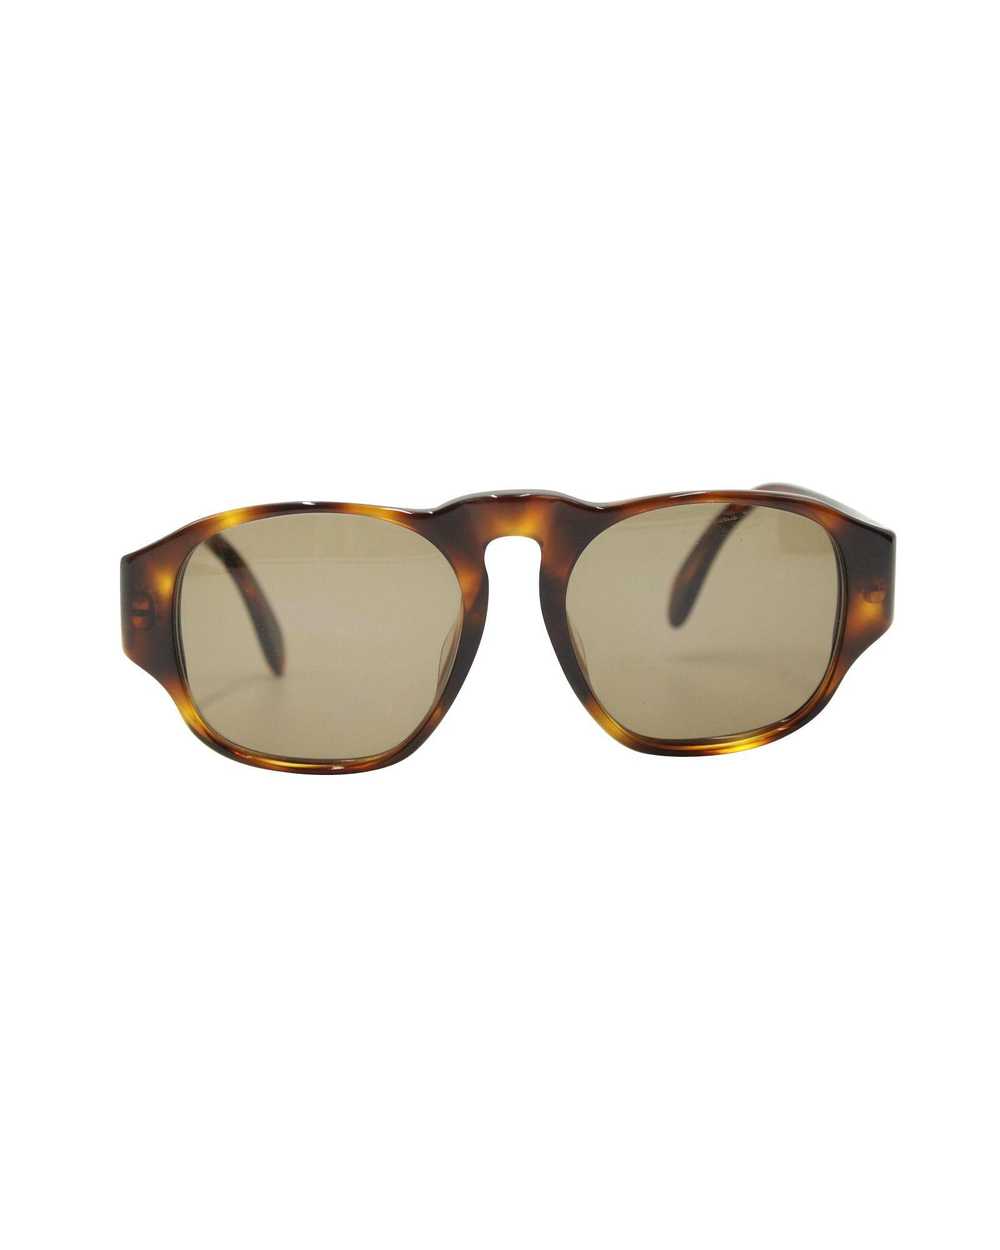 Product Details Chanel Tortoise Shell Sunglasses - image 2